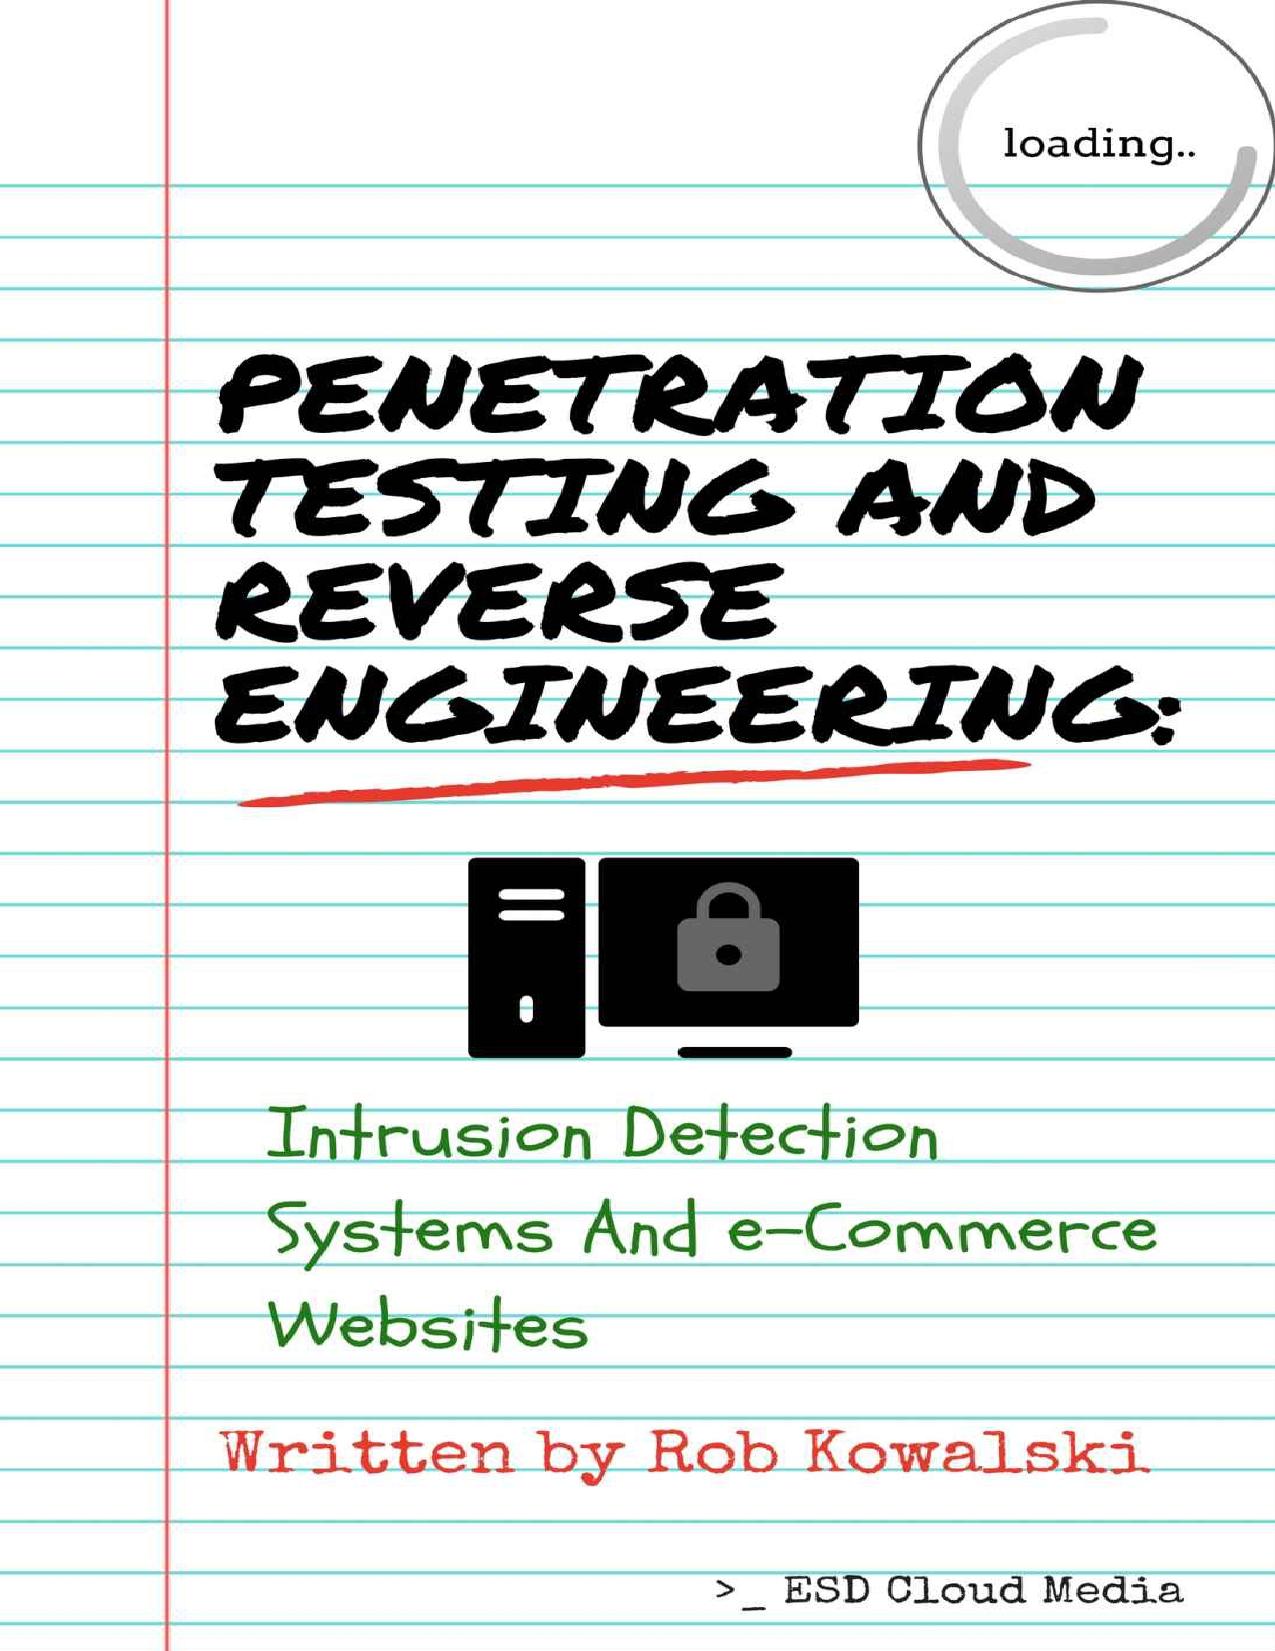 Penetration Testing and Reverse Engineering: Intrusion Detection Systems and e-Commerce Websites by Rob Kowalski